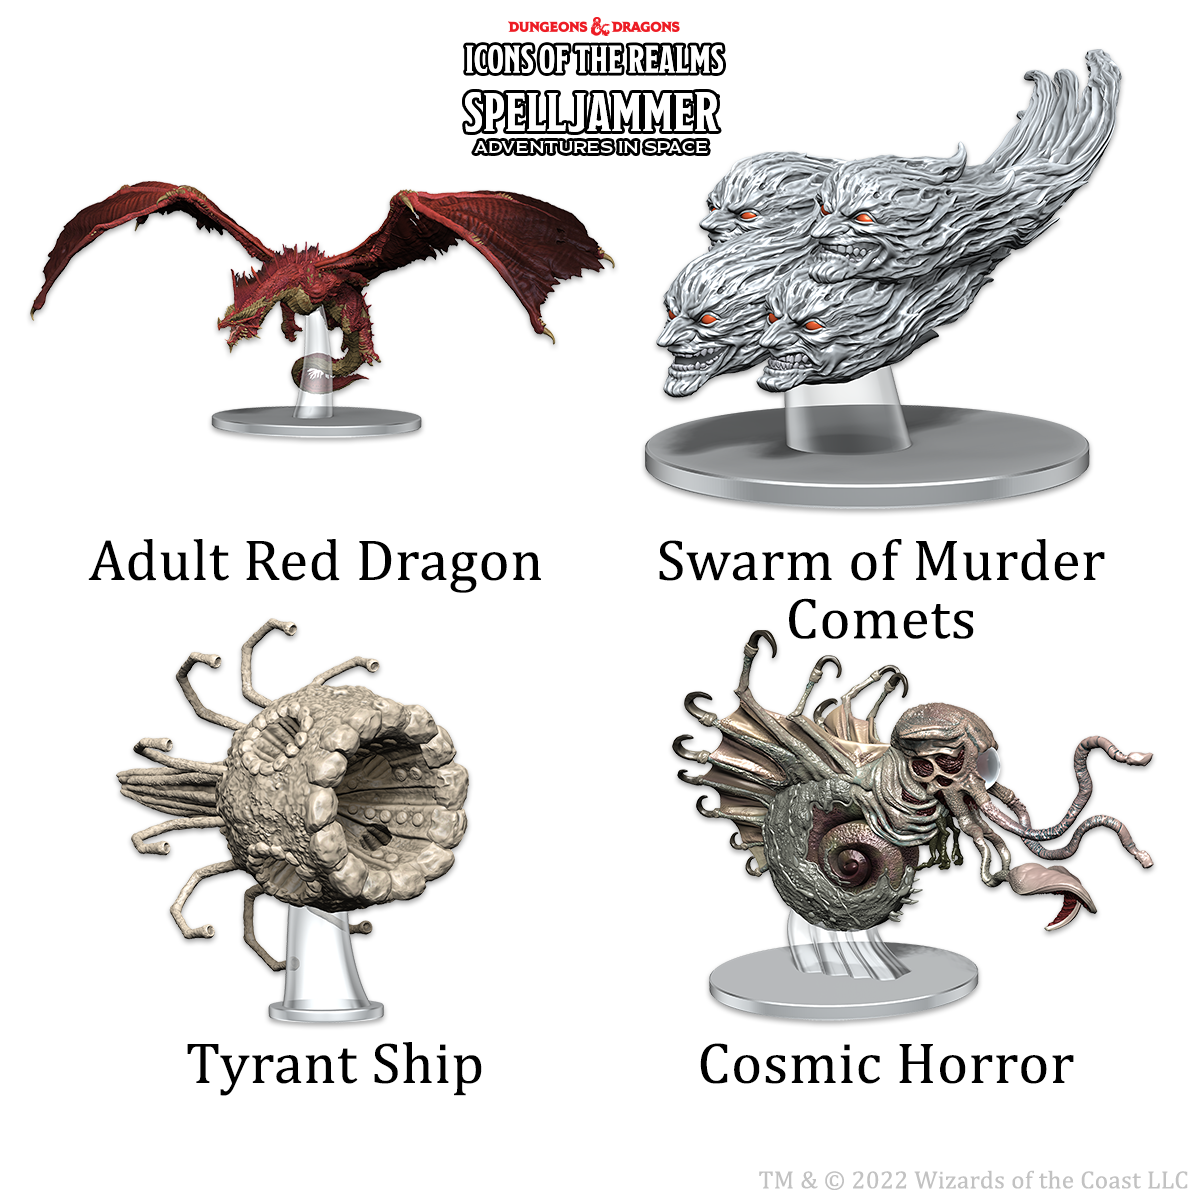 D&D Icons of the Realms: Spelljammer Adventures in Space: Ship Scale Threats From The Cosmos 